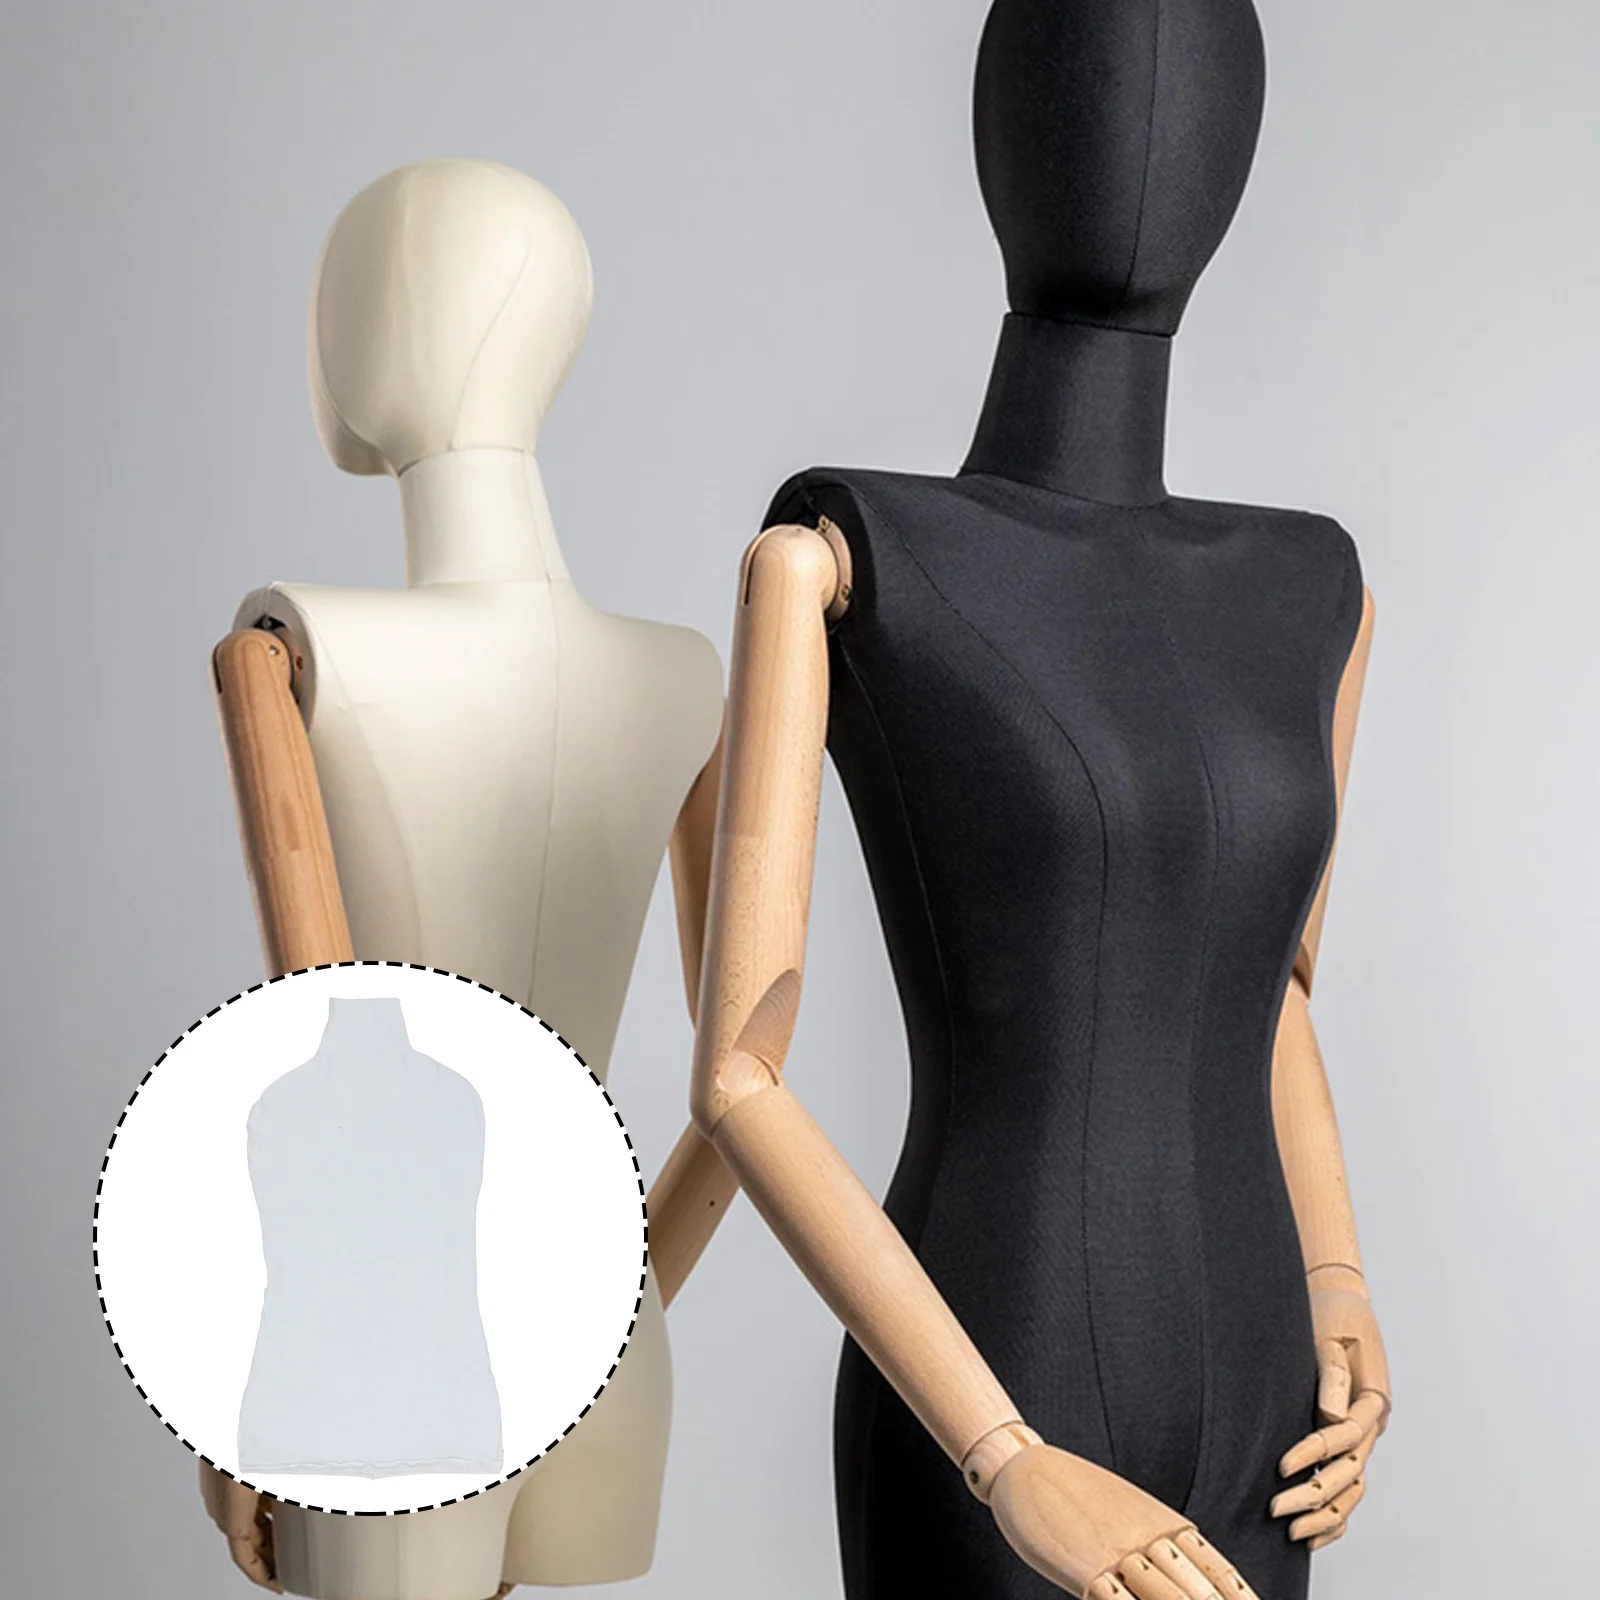 Lace Black Top Cloth Cover Upper Body Mannequin Overlay Decorative Model 68.5X36CM Dummy Cotton White Woman